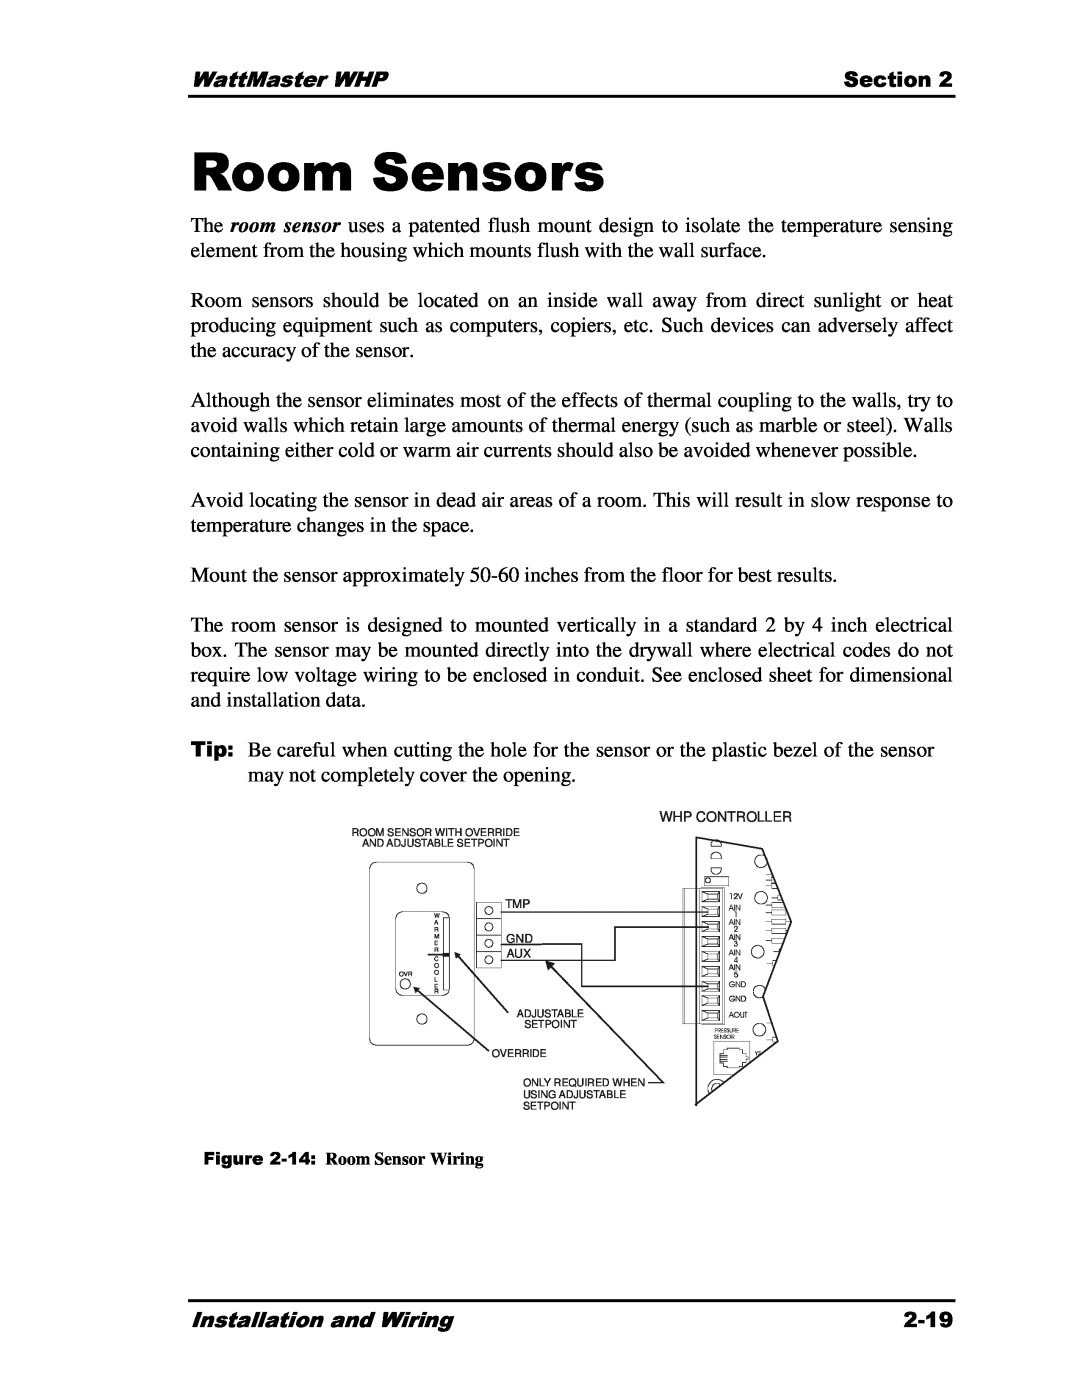 Heat Controller Water Source Heat Pump manual Room Sensors, 14, 2-19, Installation and Wiring 